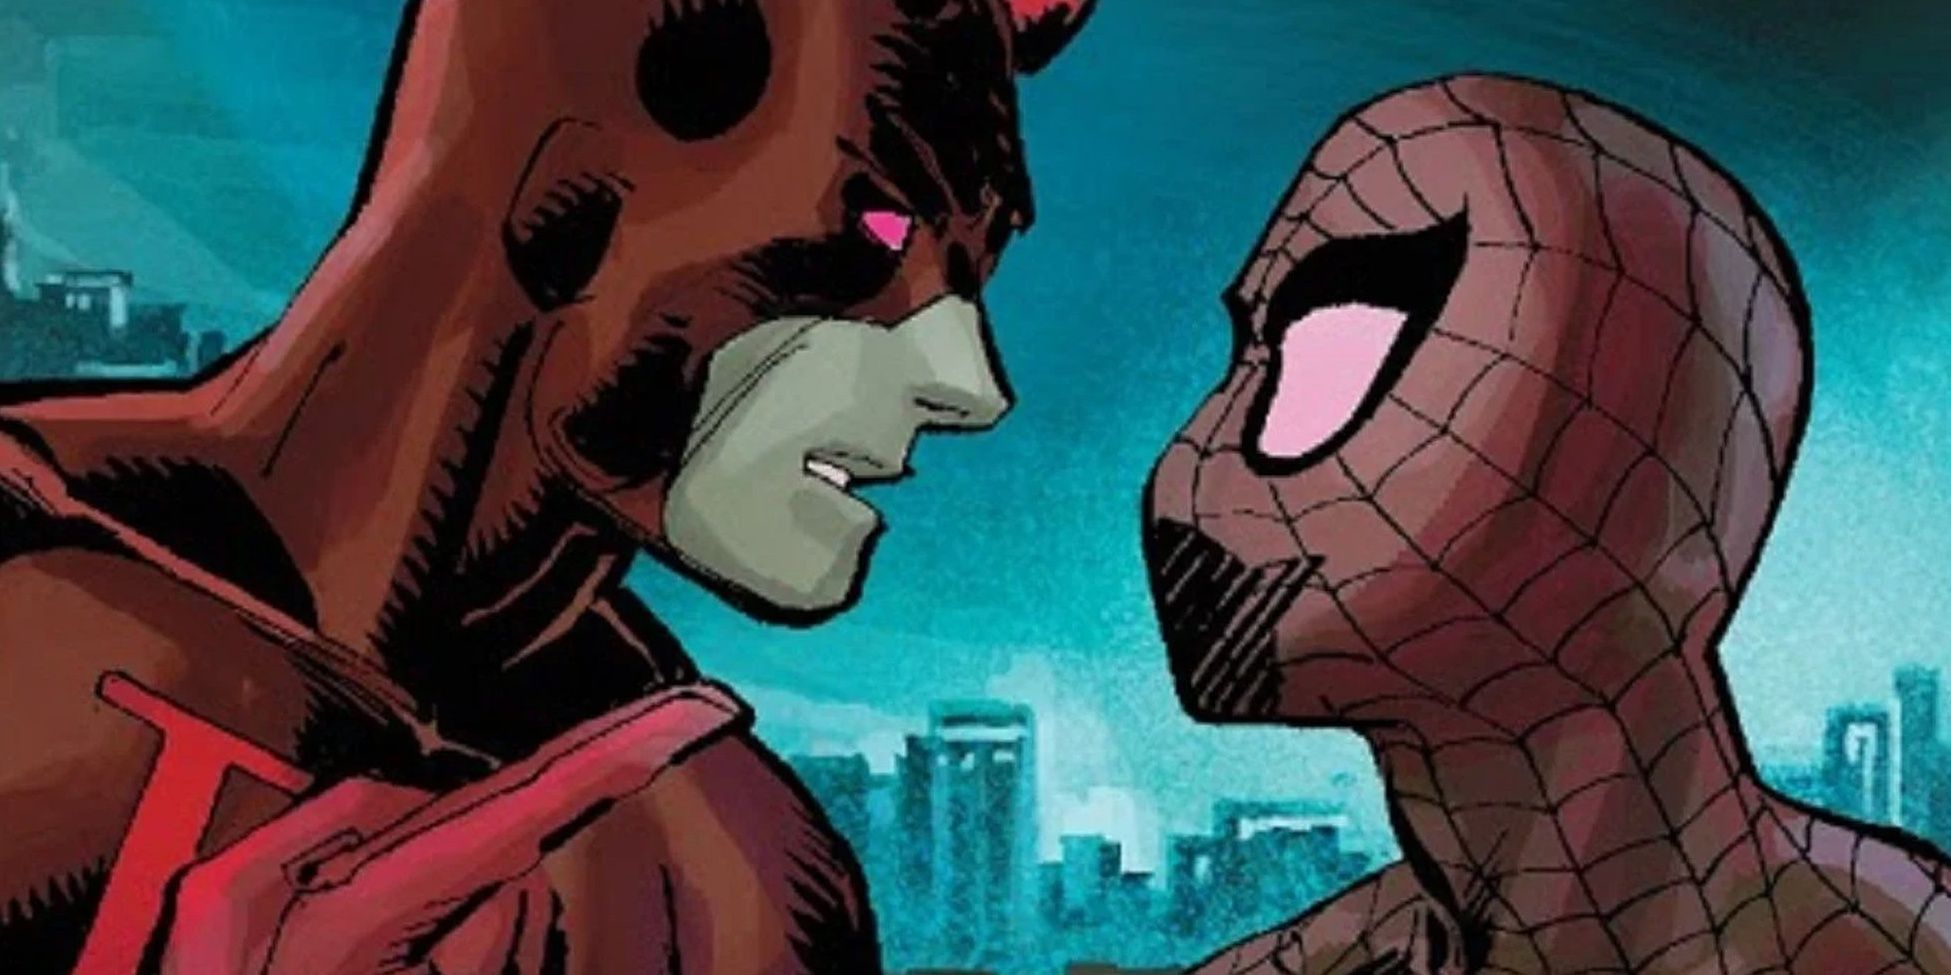 Spider-Man face to face with Daredevil